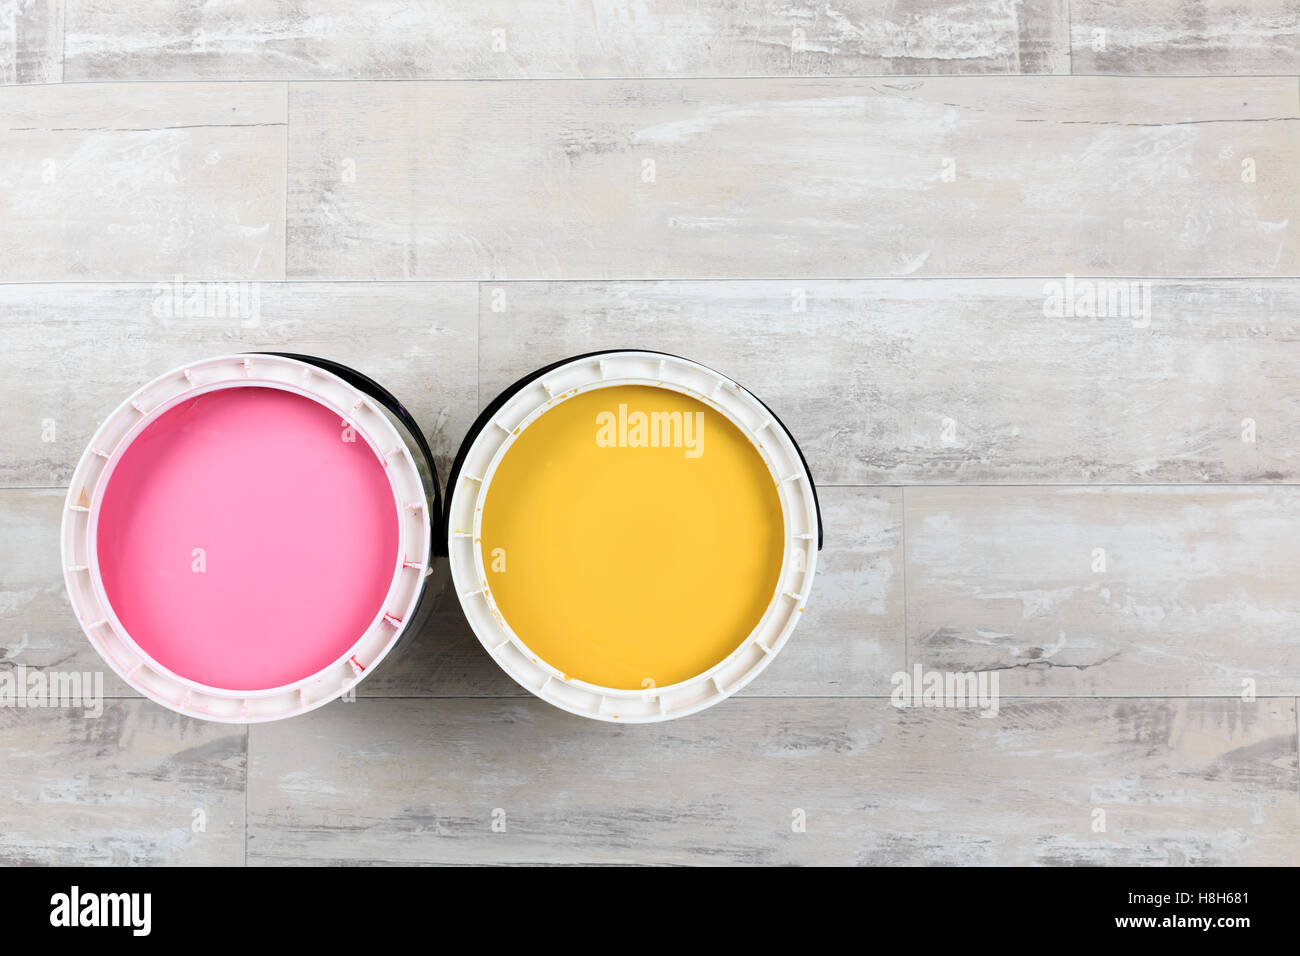 Looking down on two open paint cans of coloured paint  stood on a shabby style wood floor Stock Photo